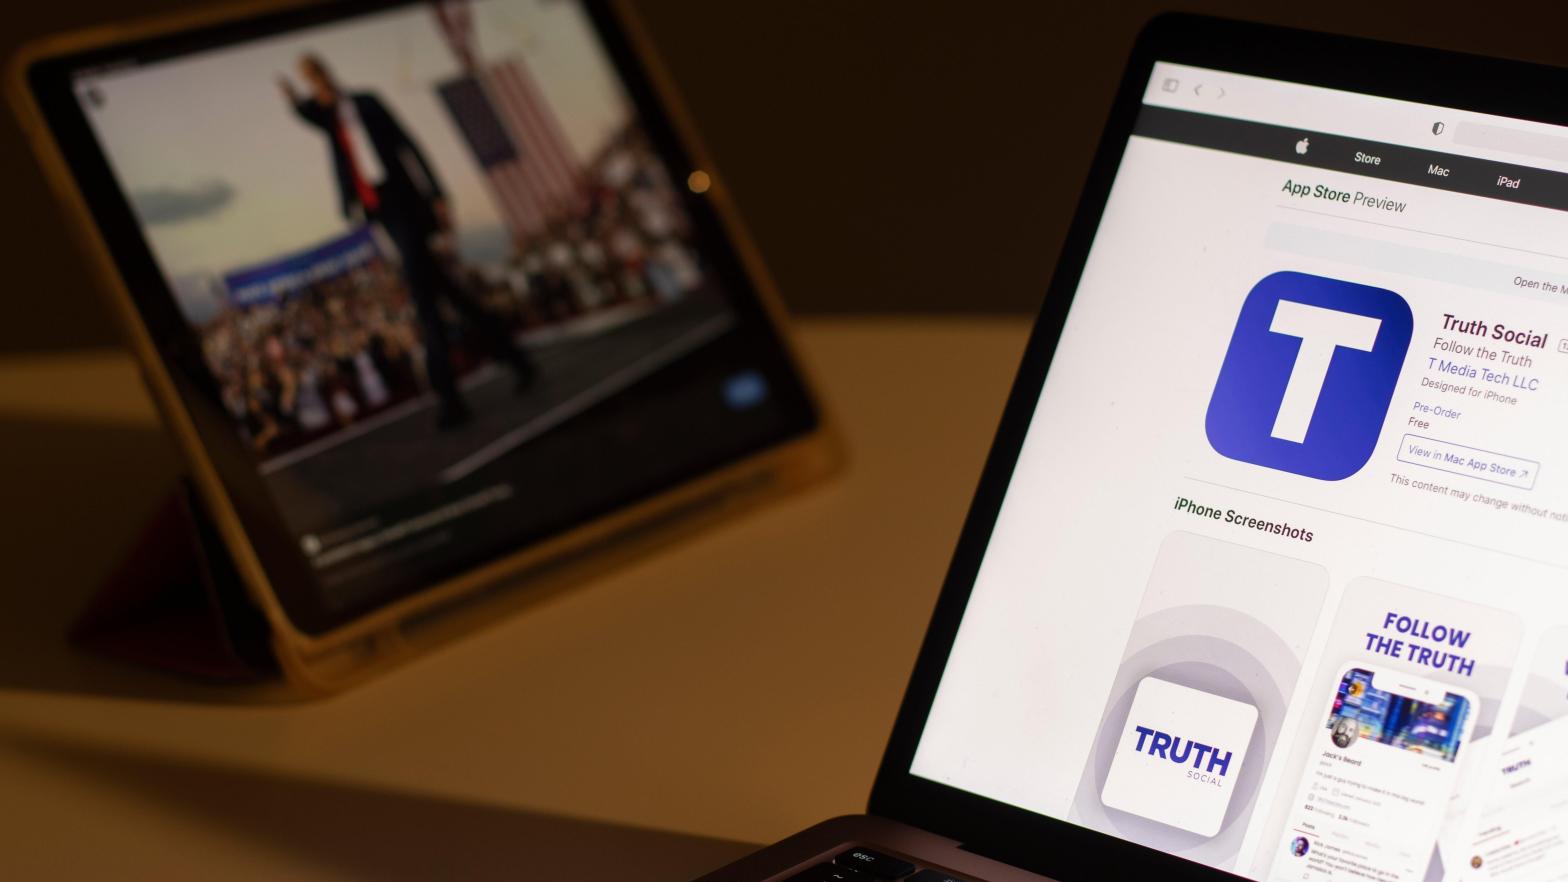 The Apple App Store has let Truth Social stay up for download since it was released this past February, but Google has so far restricted the app due to allegations it fails to moderate user content. (Photo: Tada Images, Shutterstock)